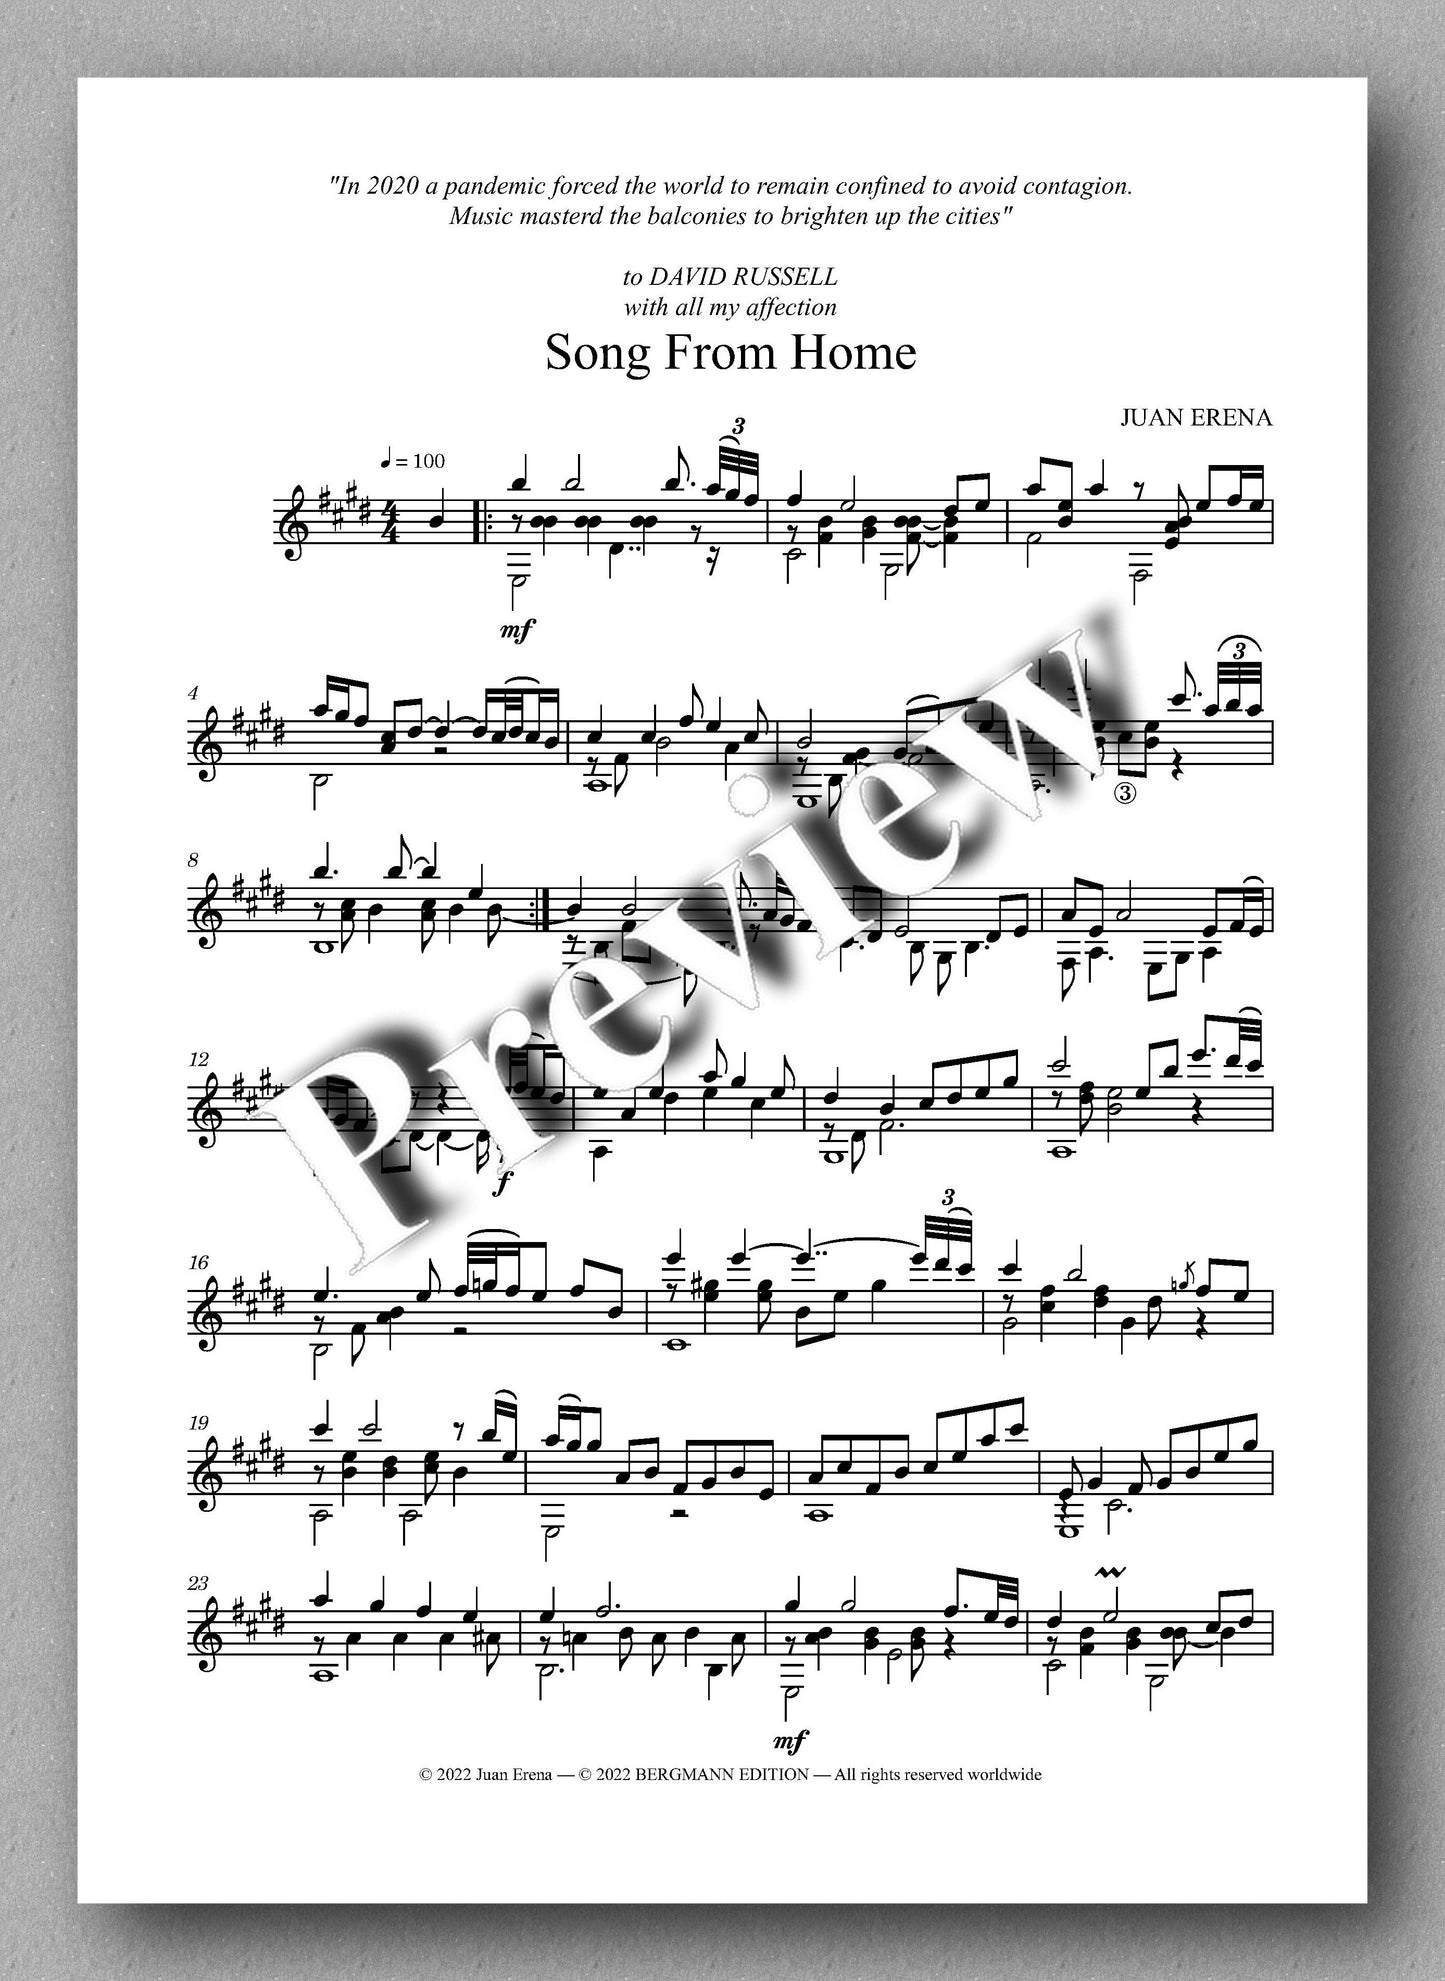 Juan Erena, Song From Home - preview of the music score